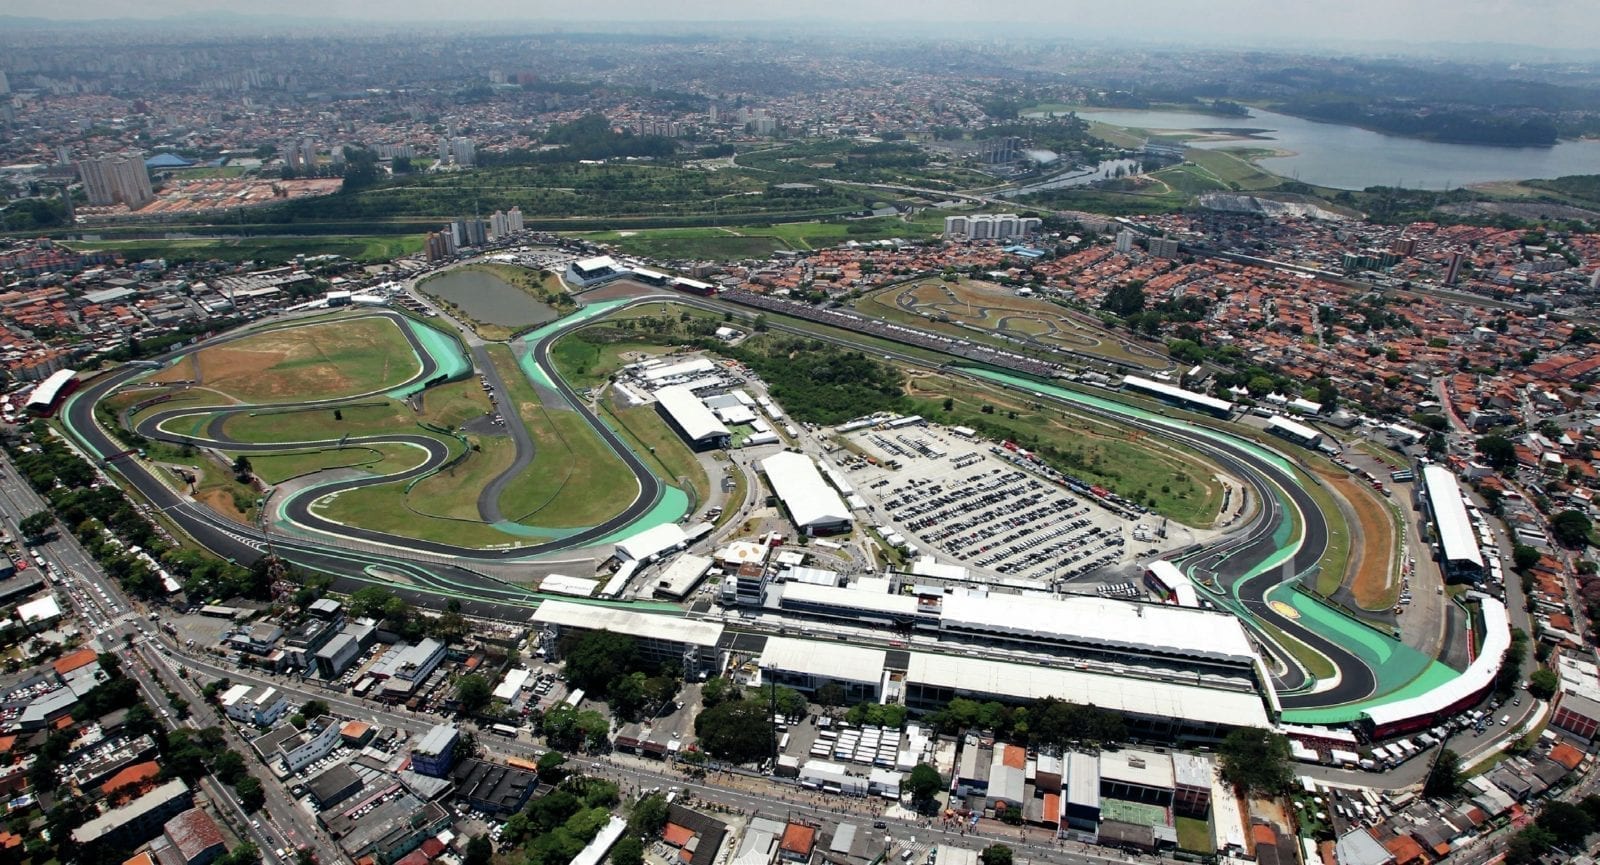 Interlagos circuit from the air